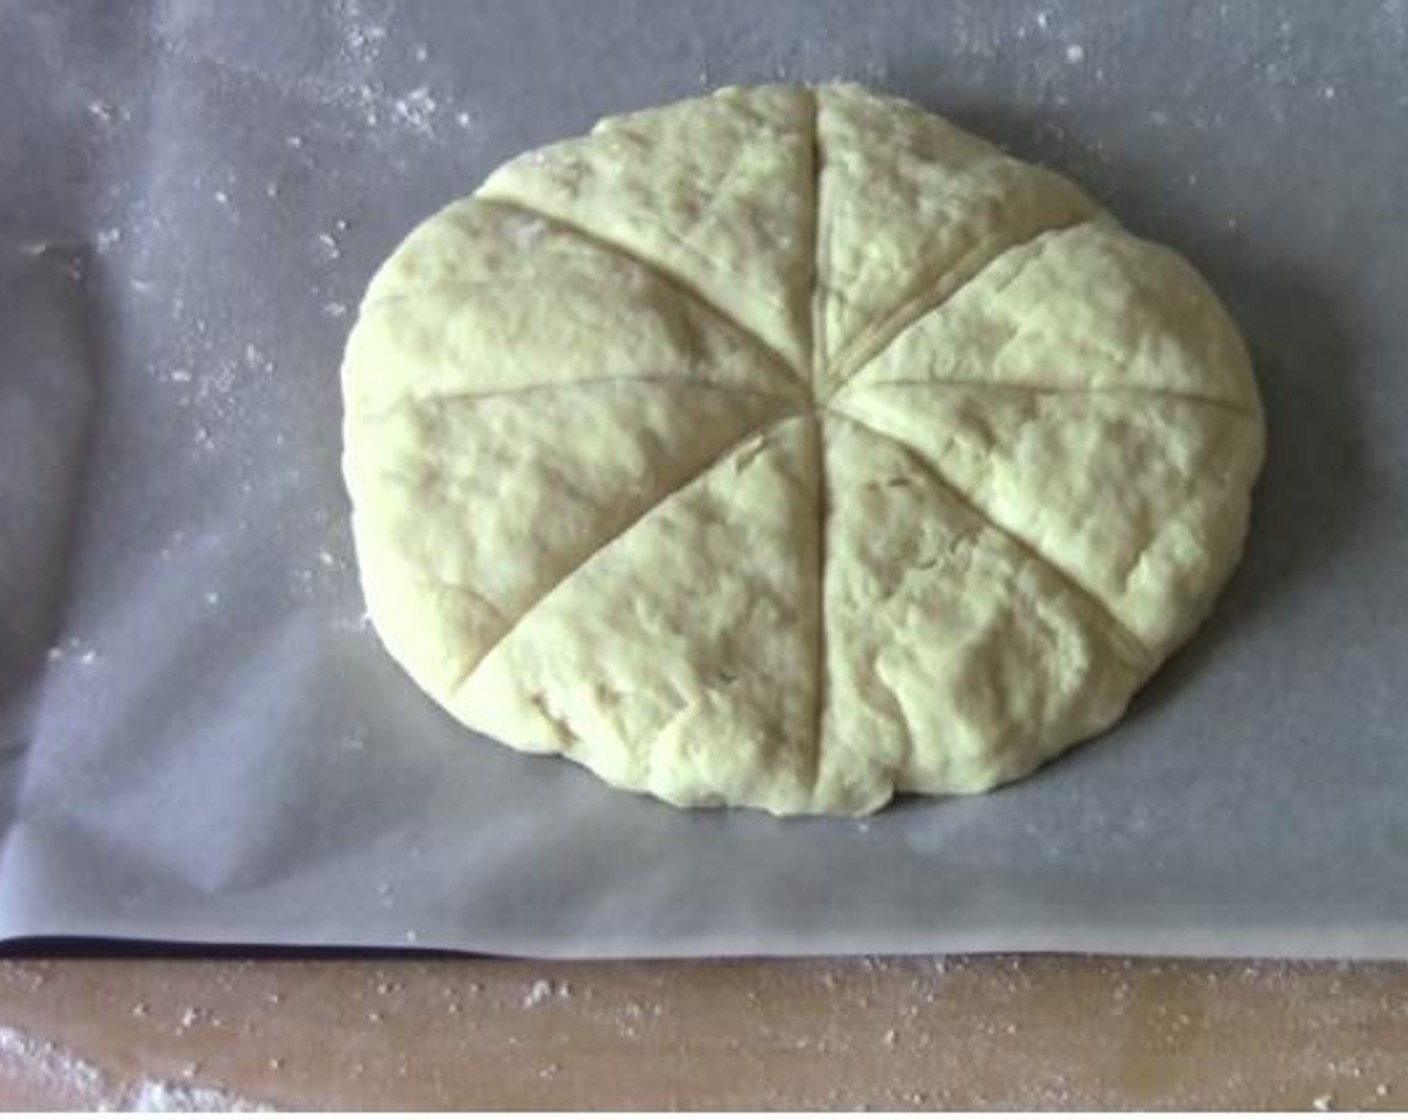 step 2 Add the Water (3/4 cup) and mix until the dough comes together. Kneed the dough on a floured surface, and shape it into a disc shape. Make wedge marks on the top, and bake the dough inside an oven for about 30 minutes at 350 degrees F (180 degrees C).